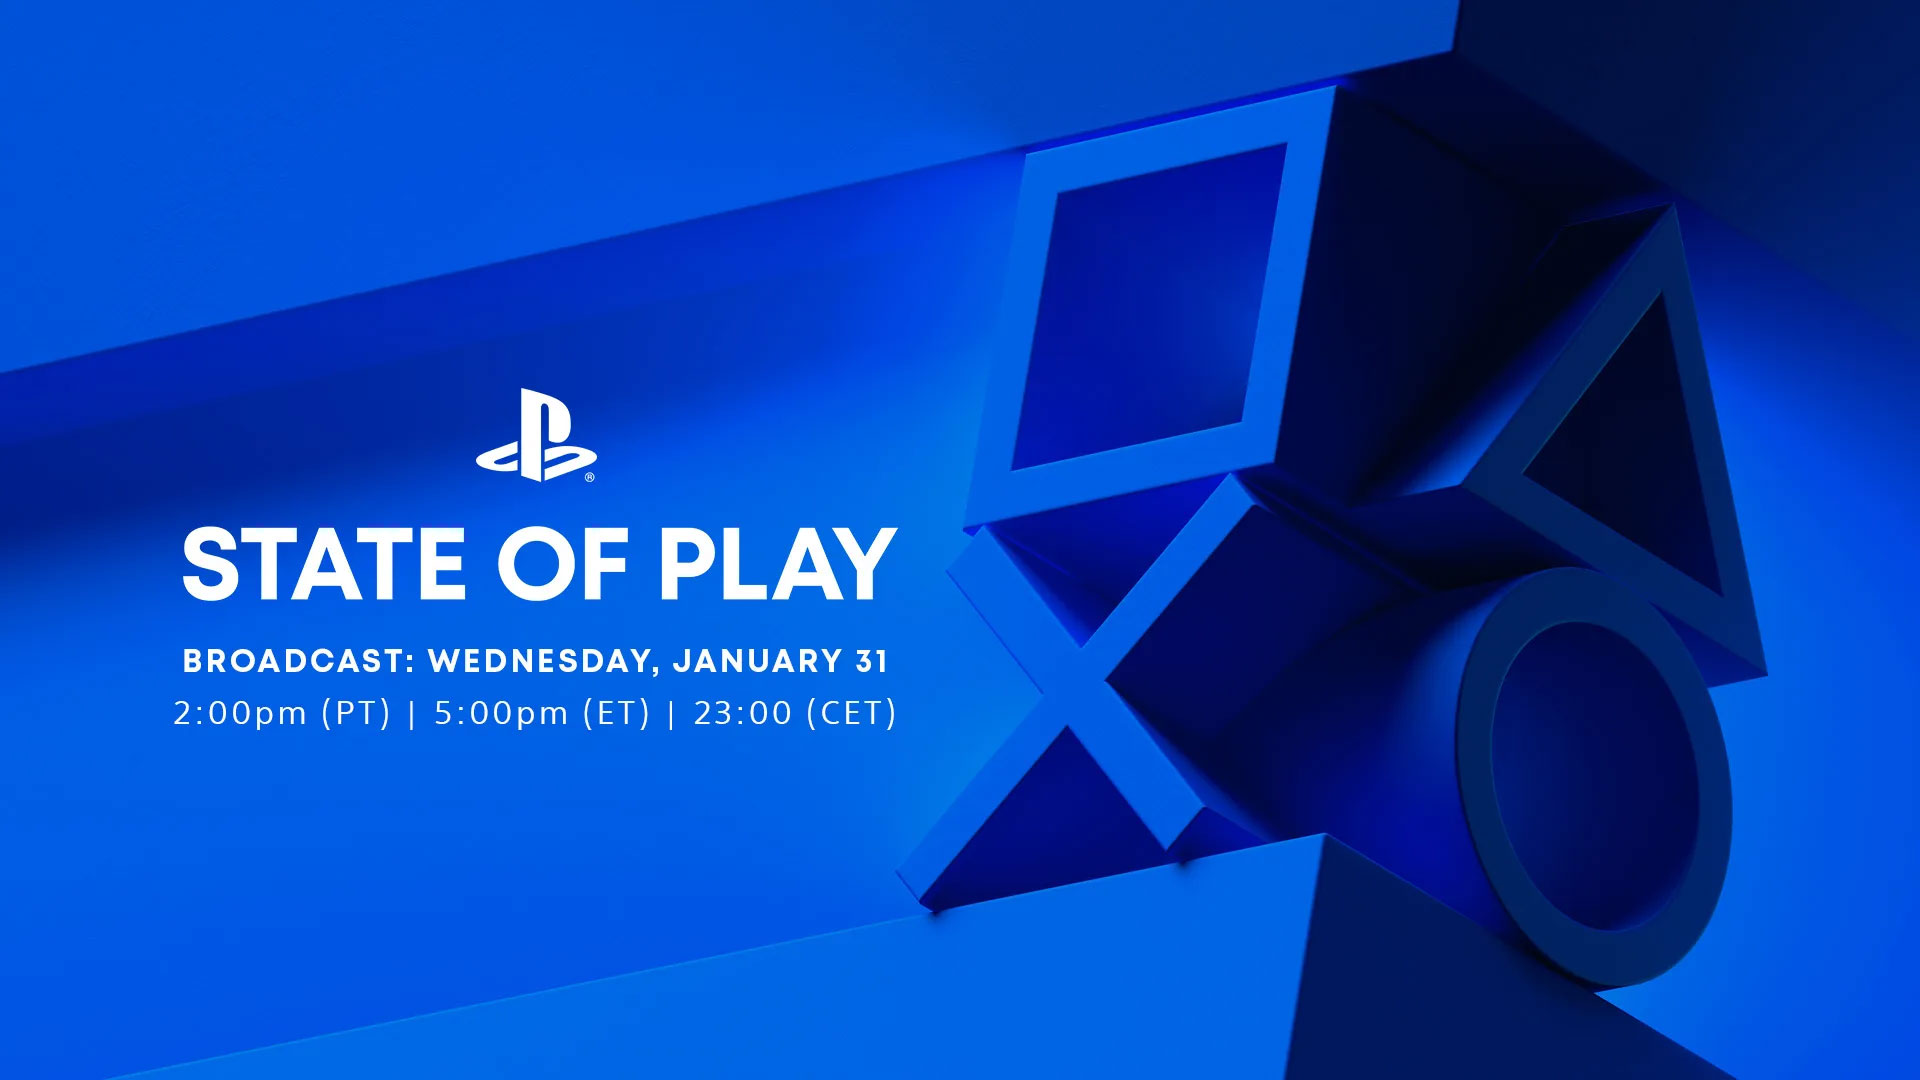 PlayStation State of Play returns January 31